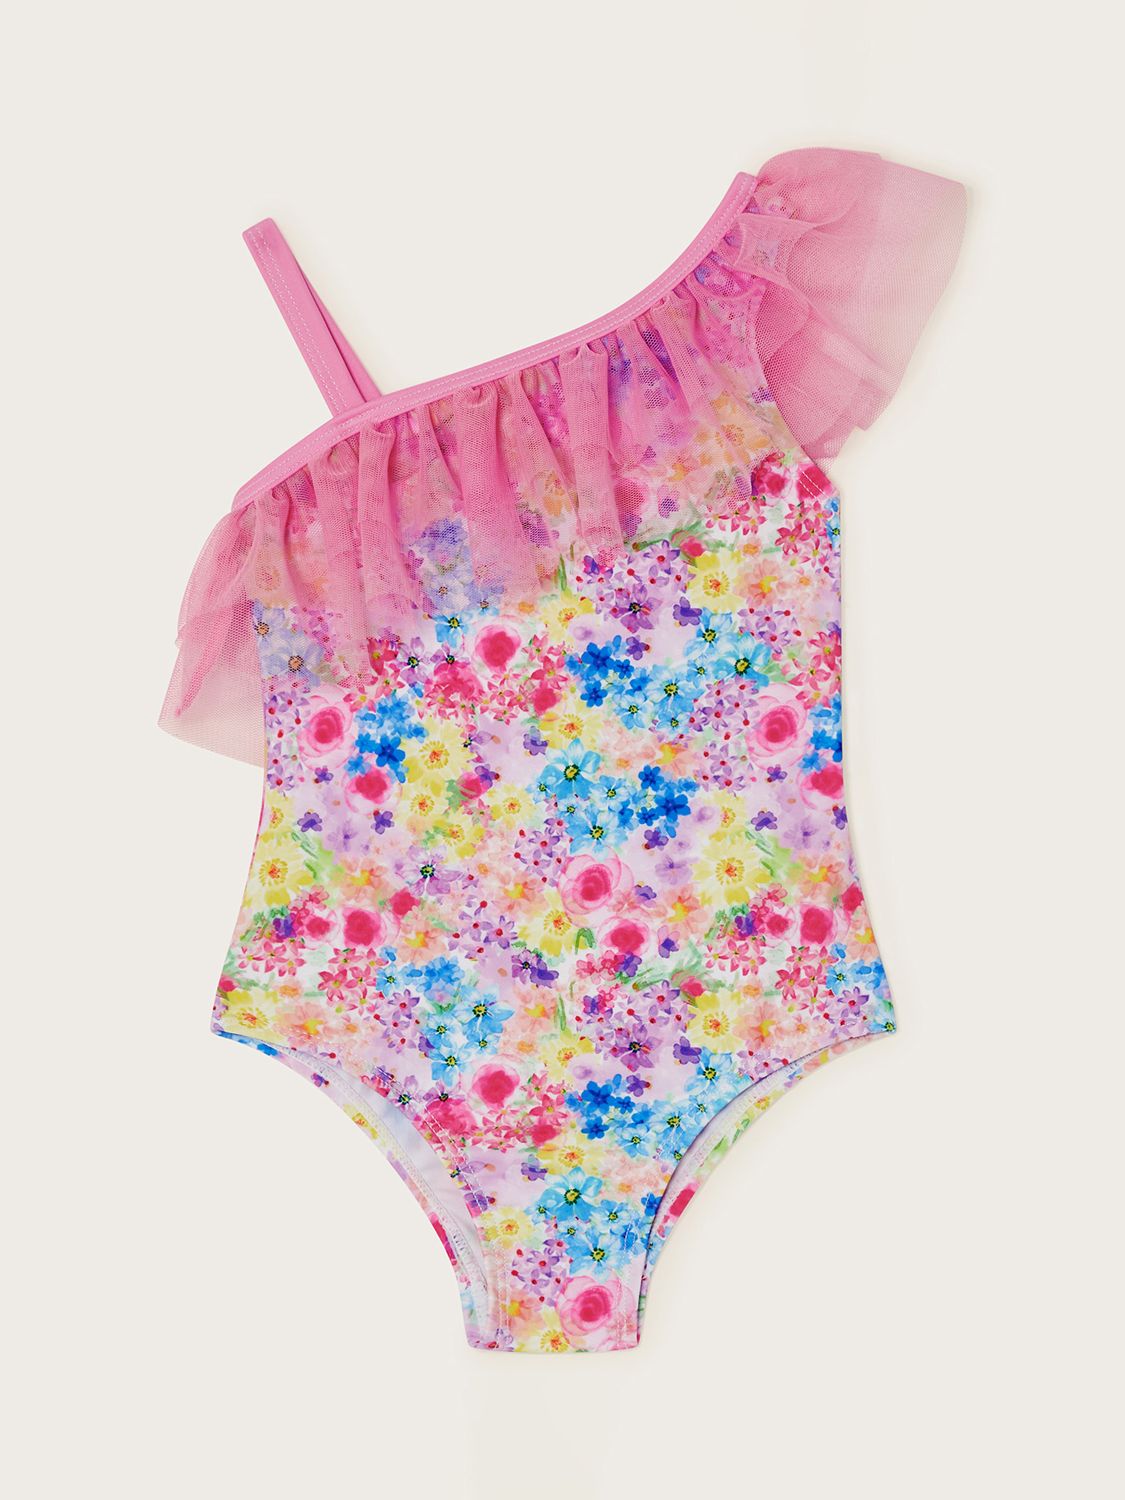 Monsoon Baby Ditsy Floral Print Mesh Ruffle Swimsuit, Pink/Multi, 0-3 months